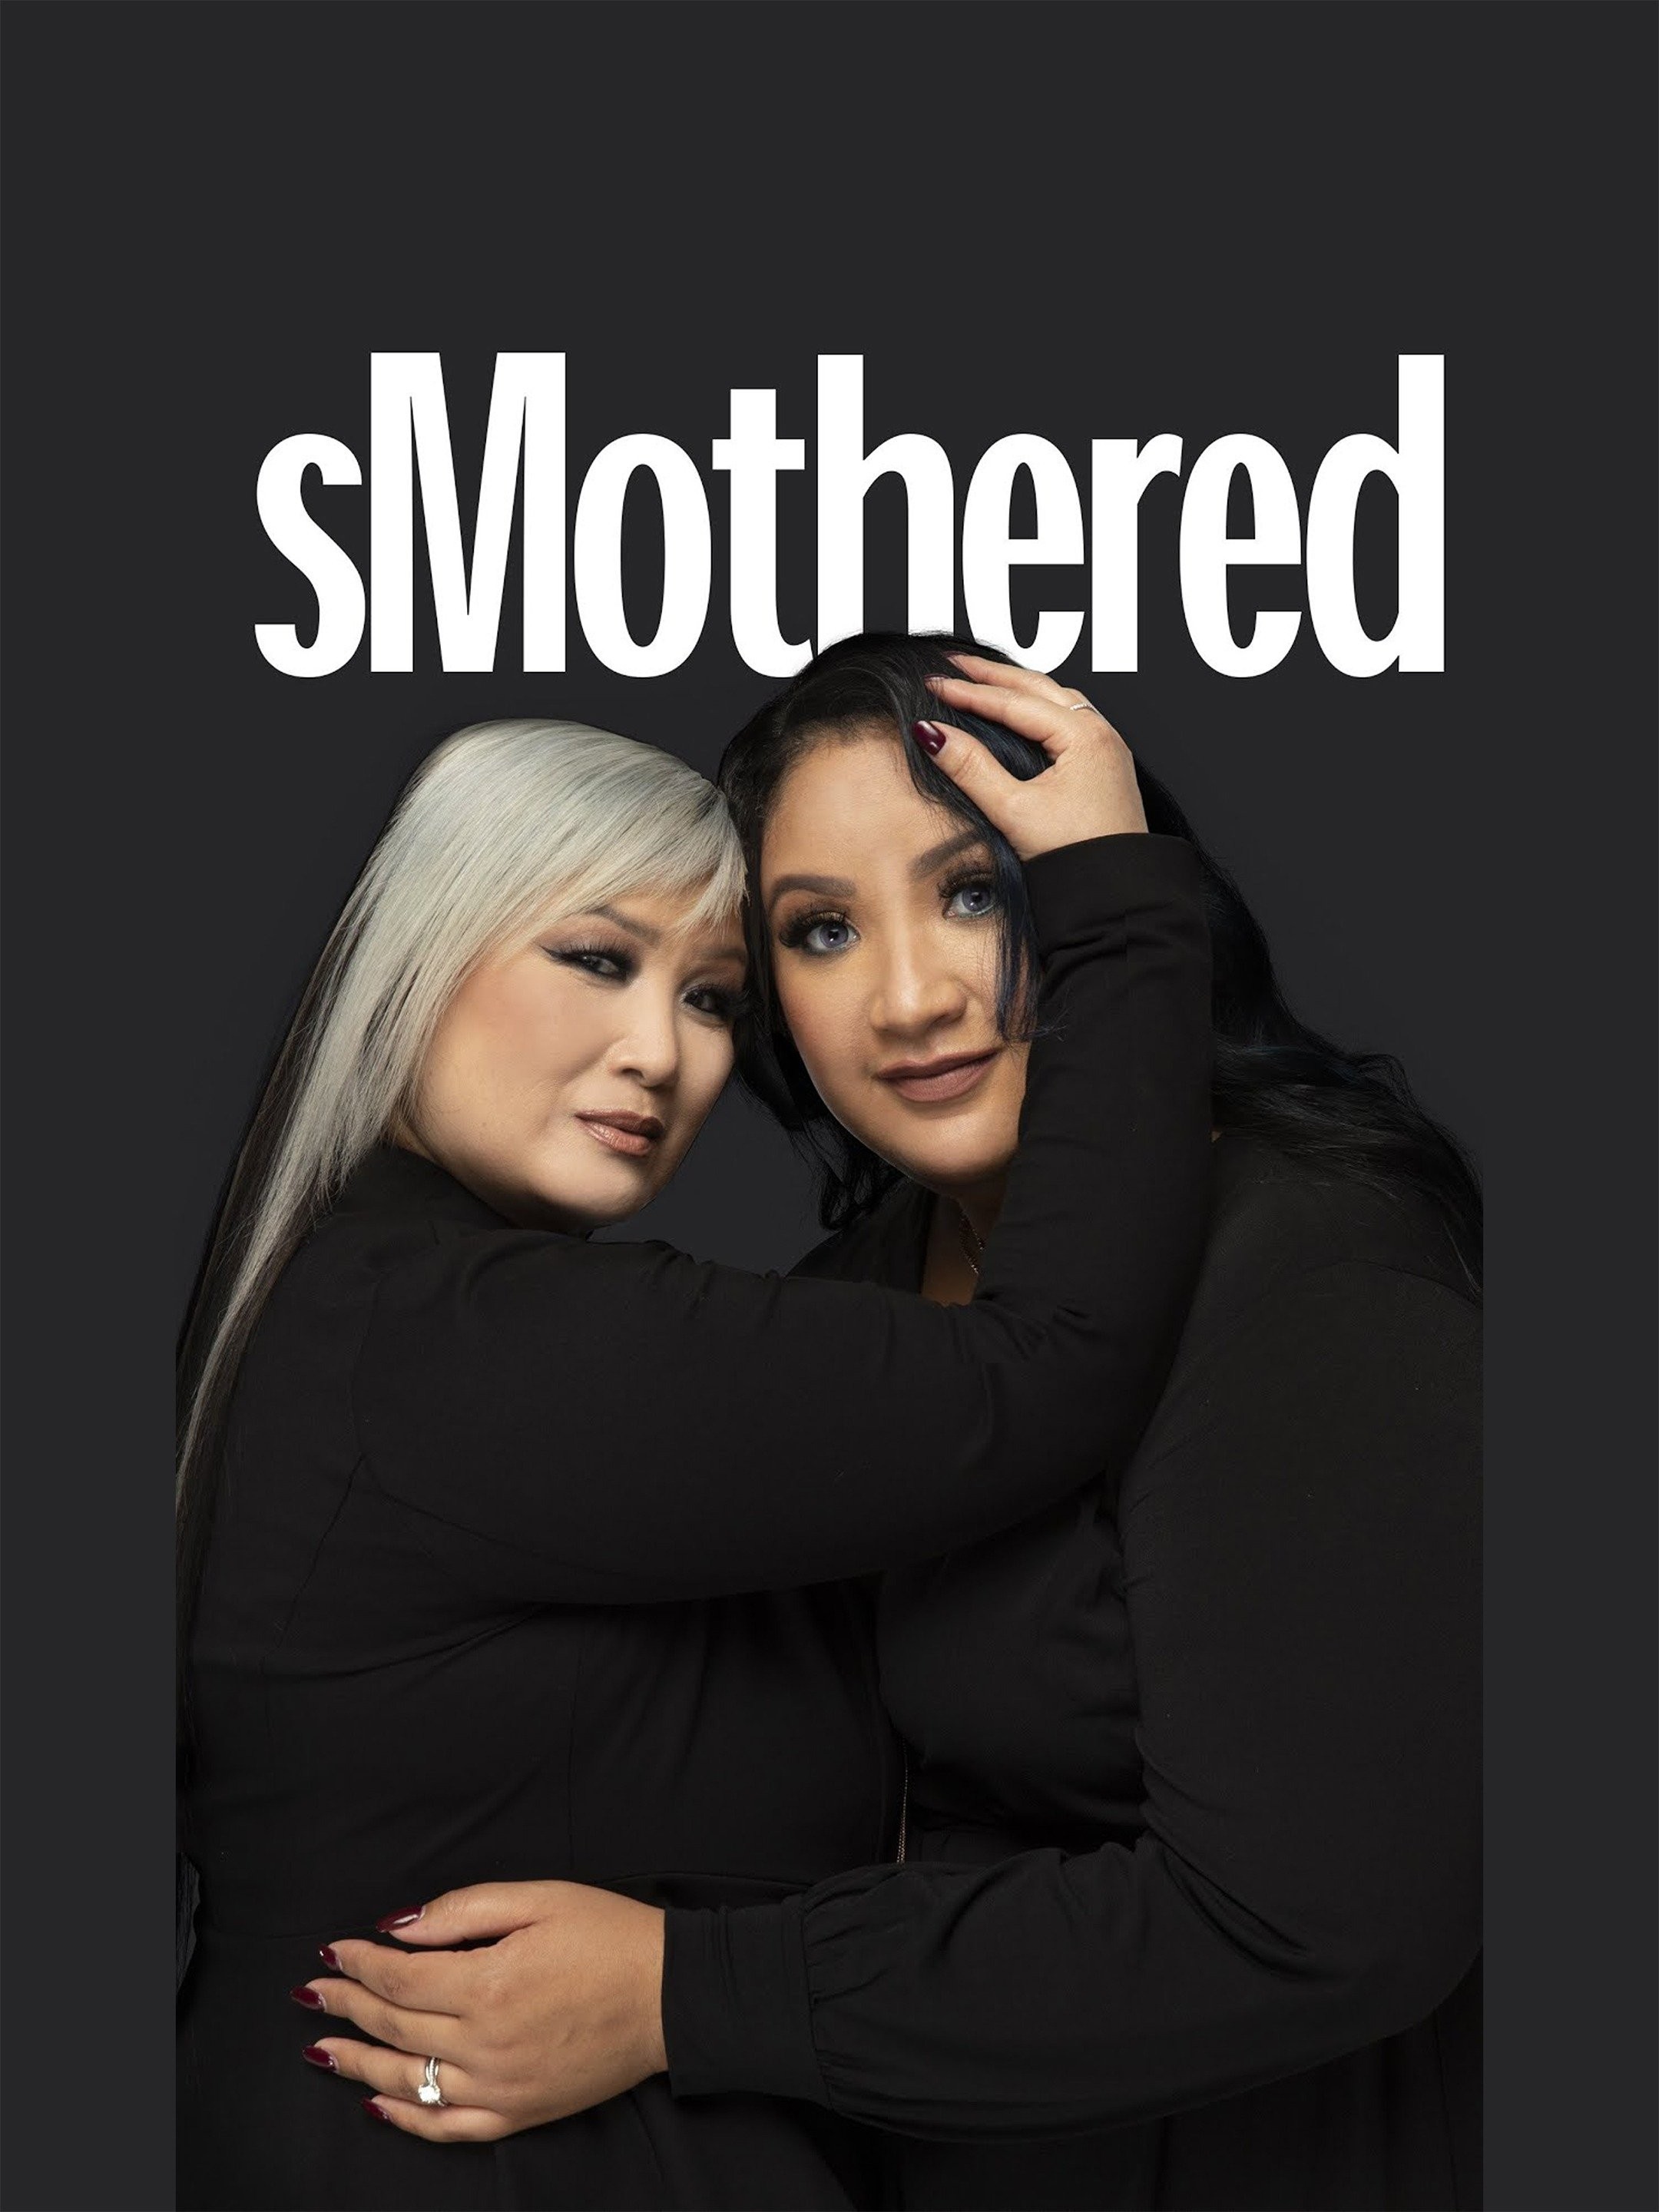 sMothered - Full Cast & Crew - TV Guide